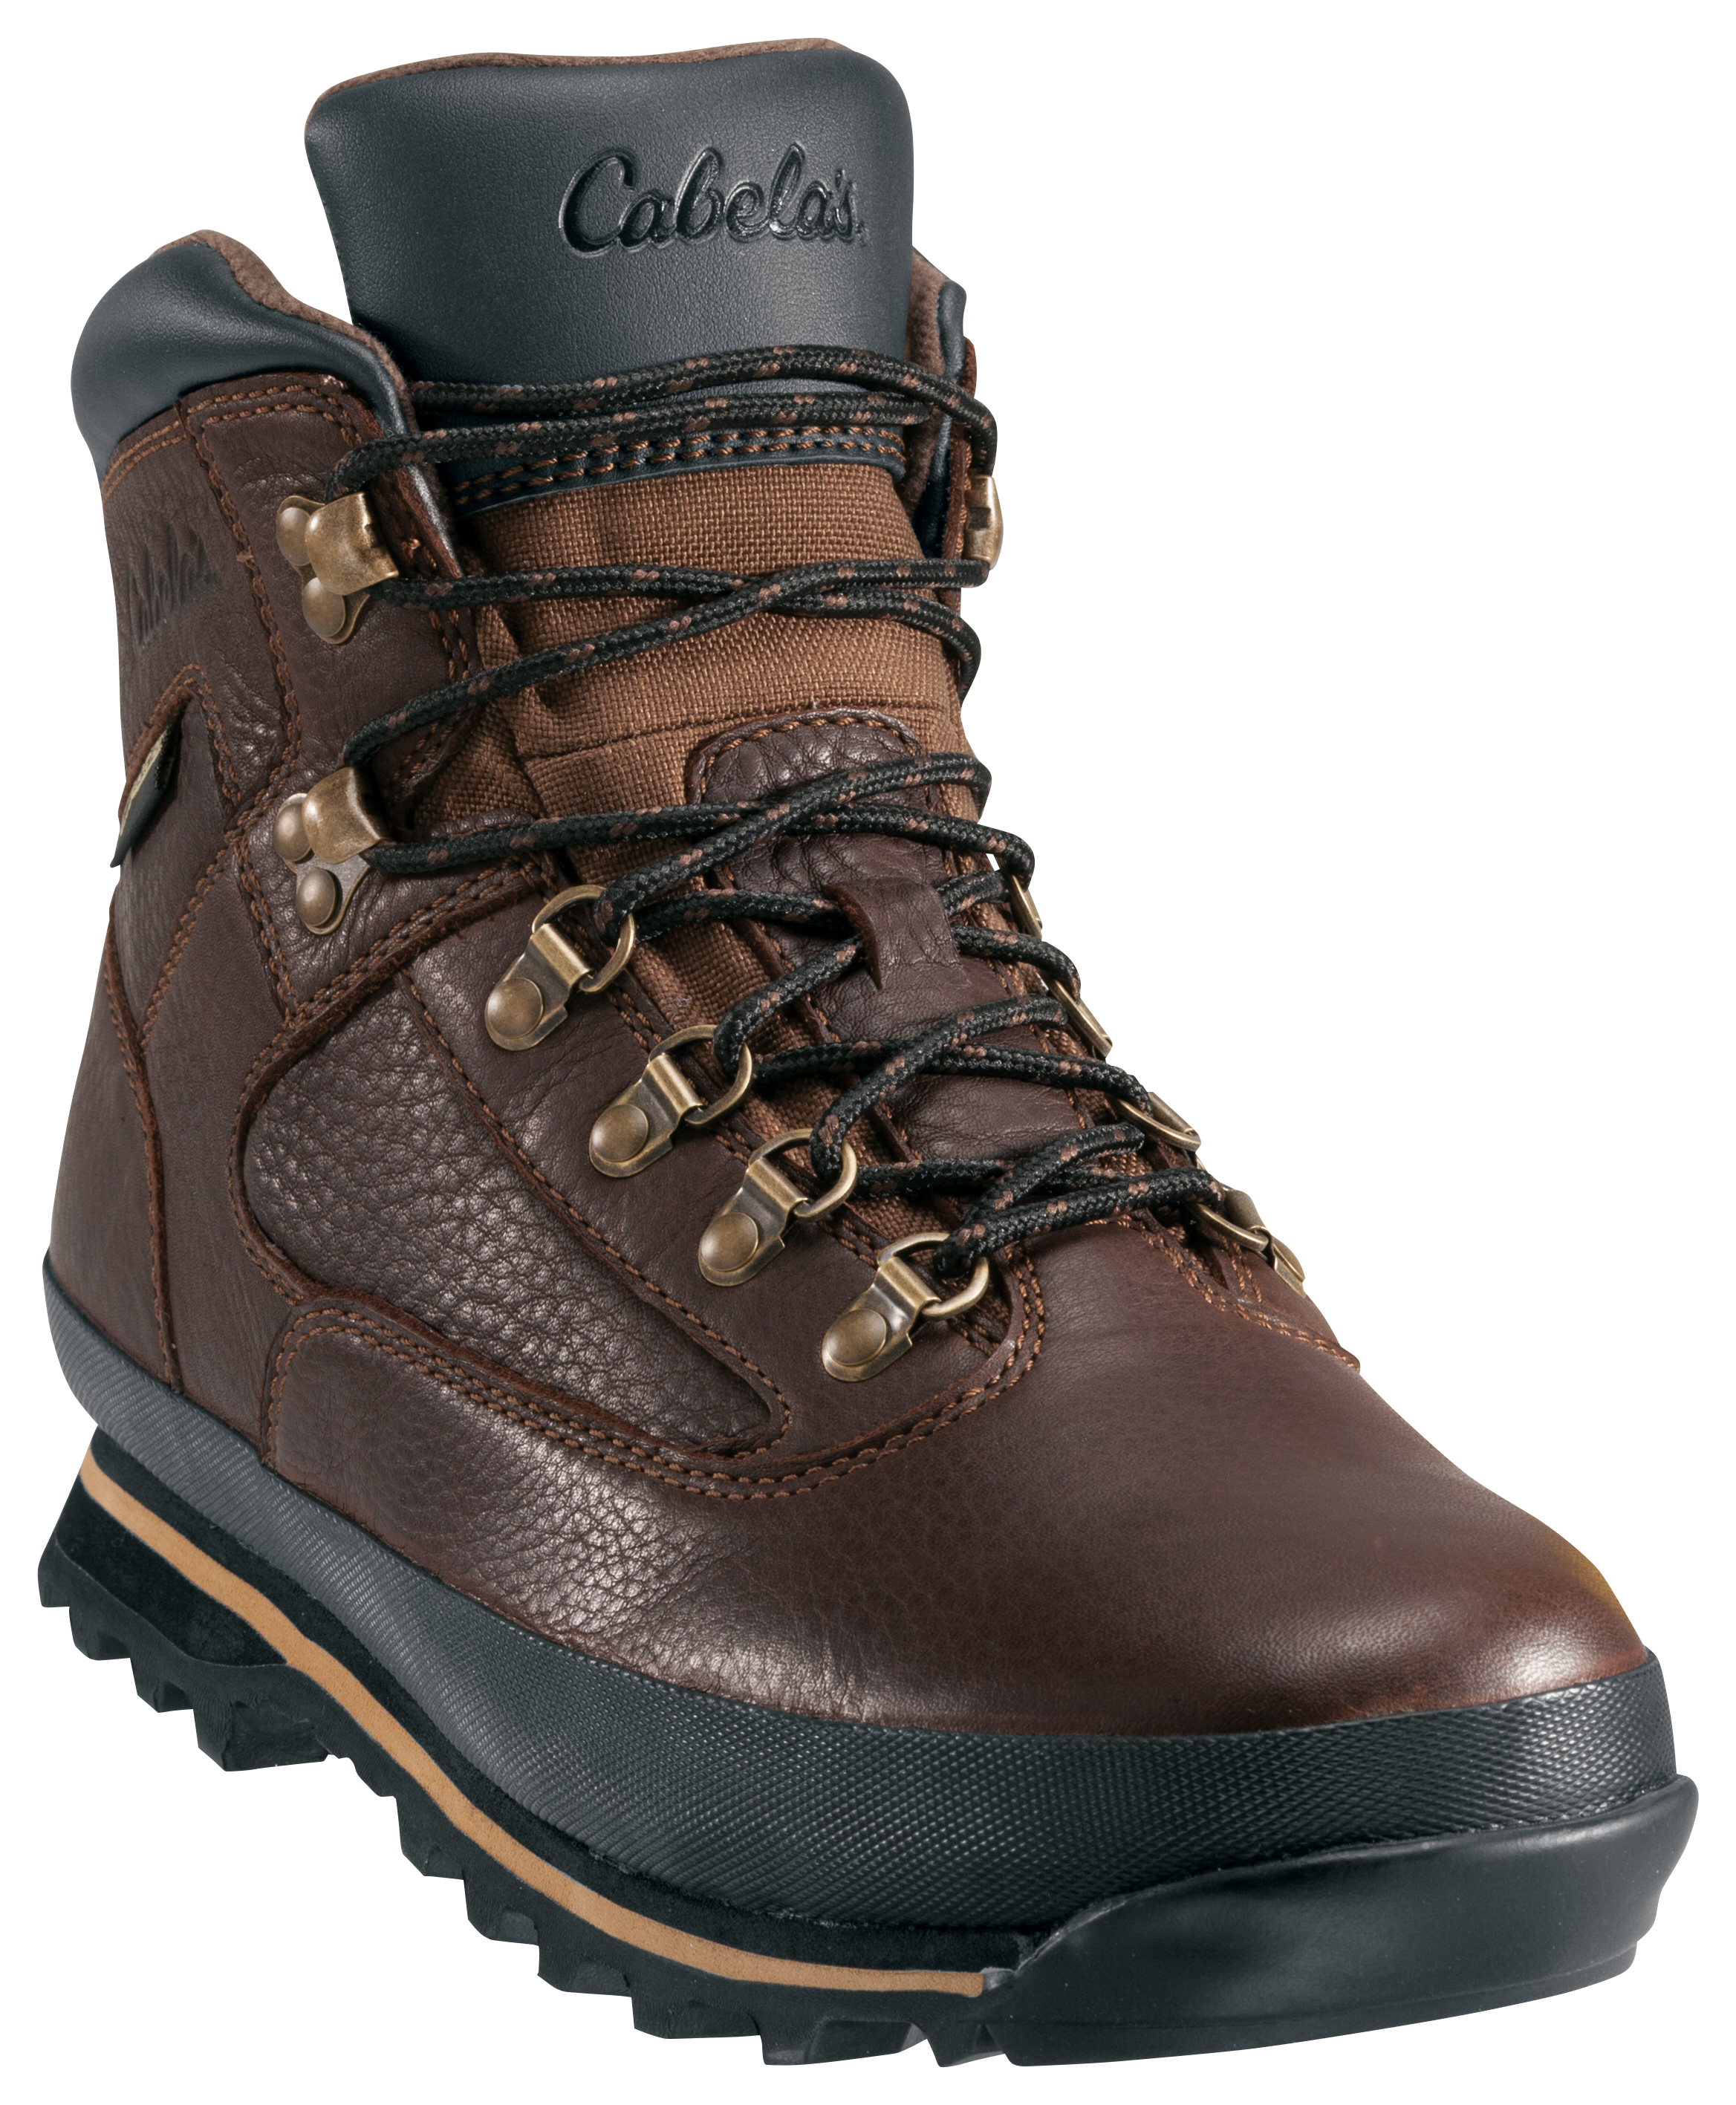 Cabela's Rimrock Mid GORE-TEX Hiking Boots for Men - Brown - 10M